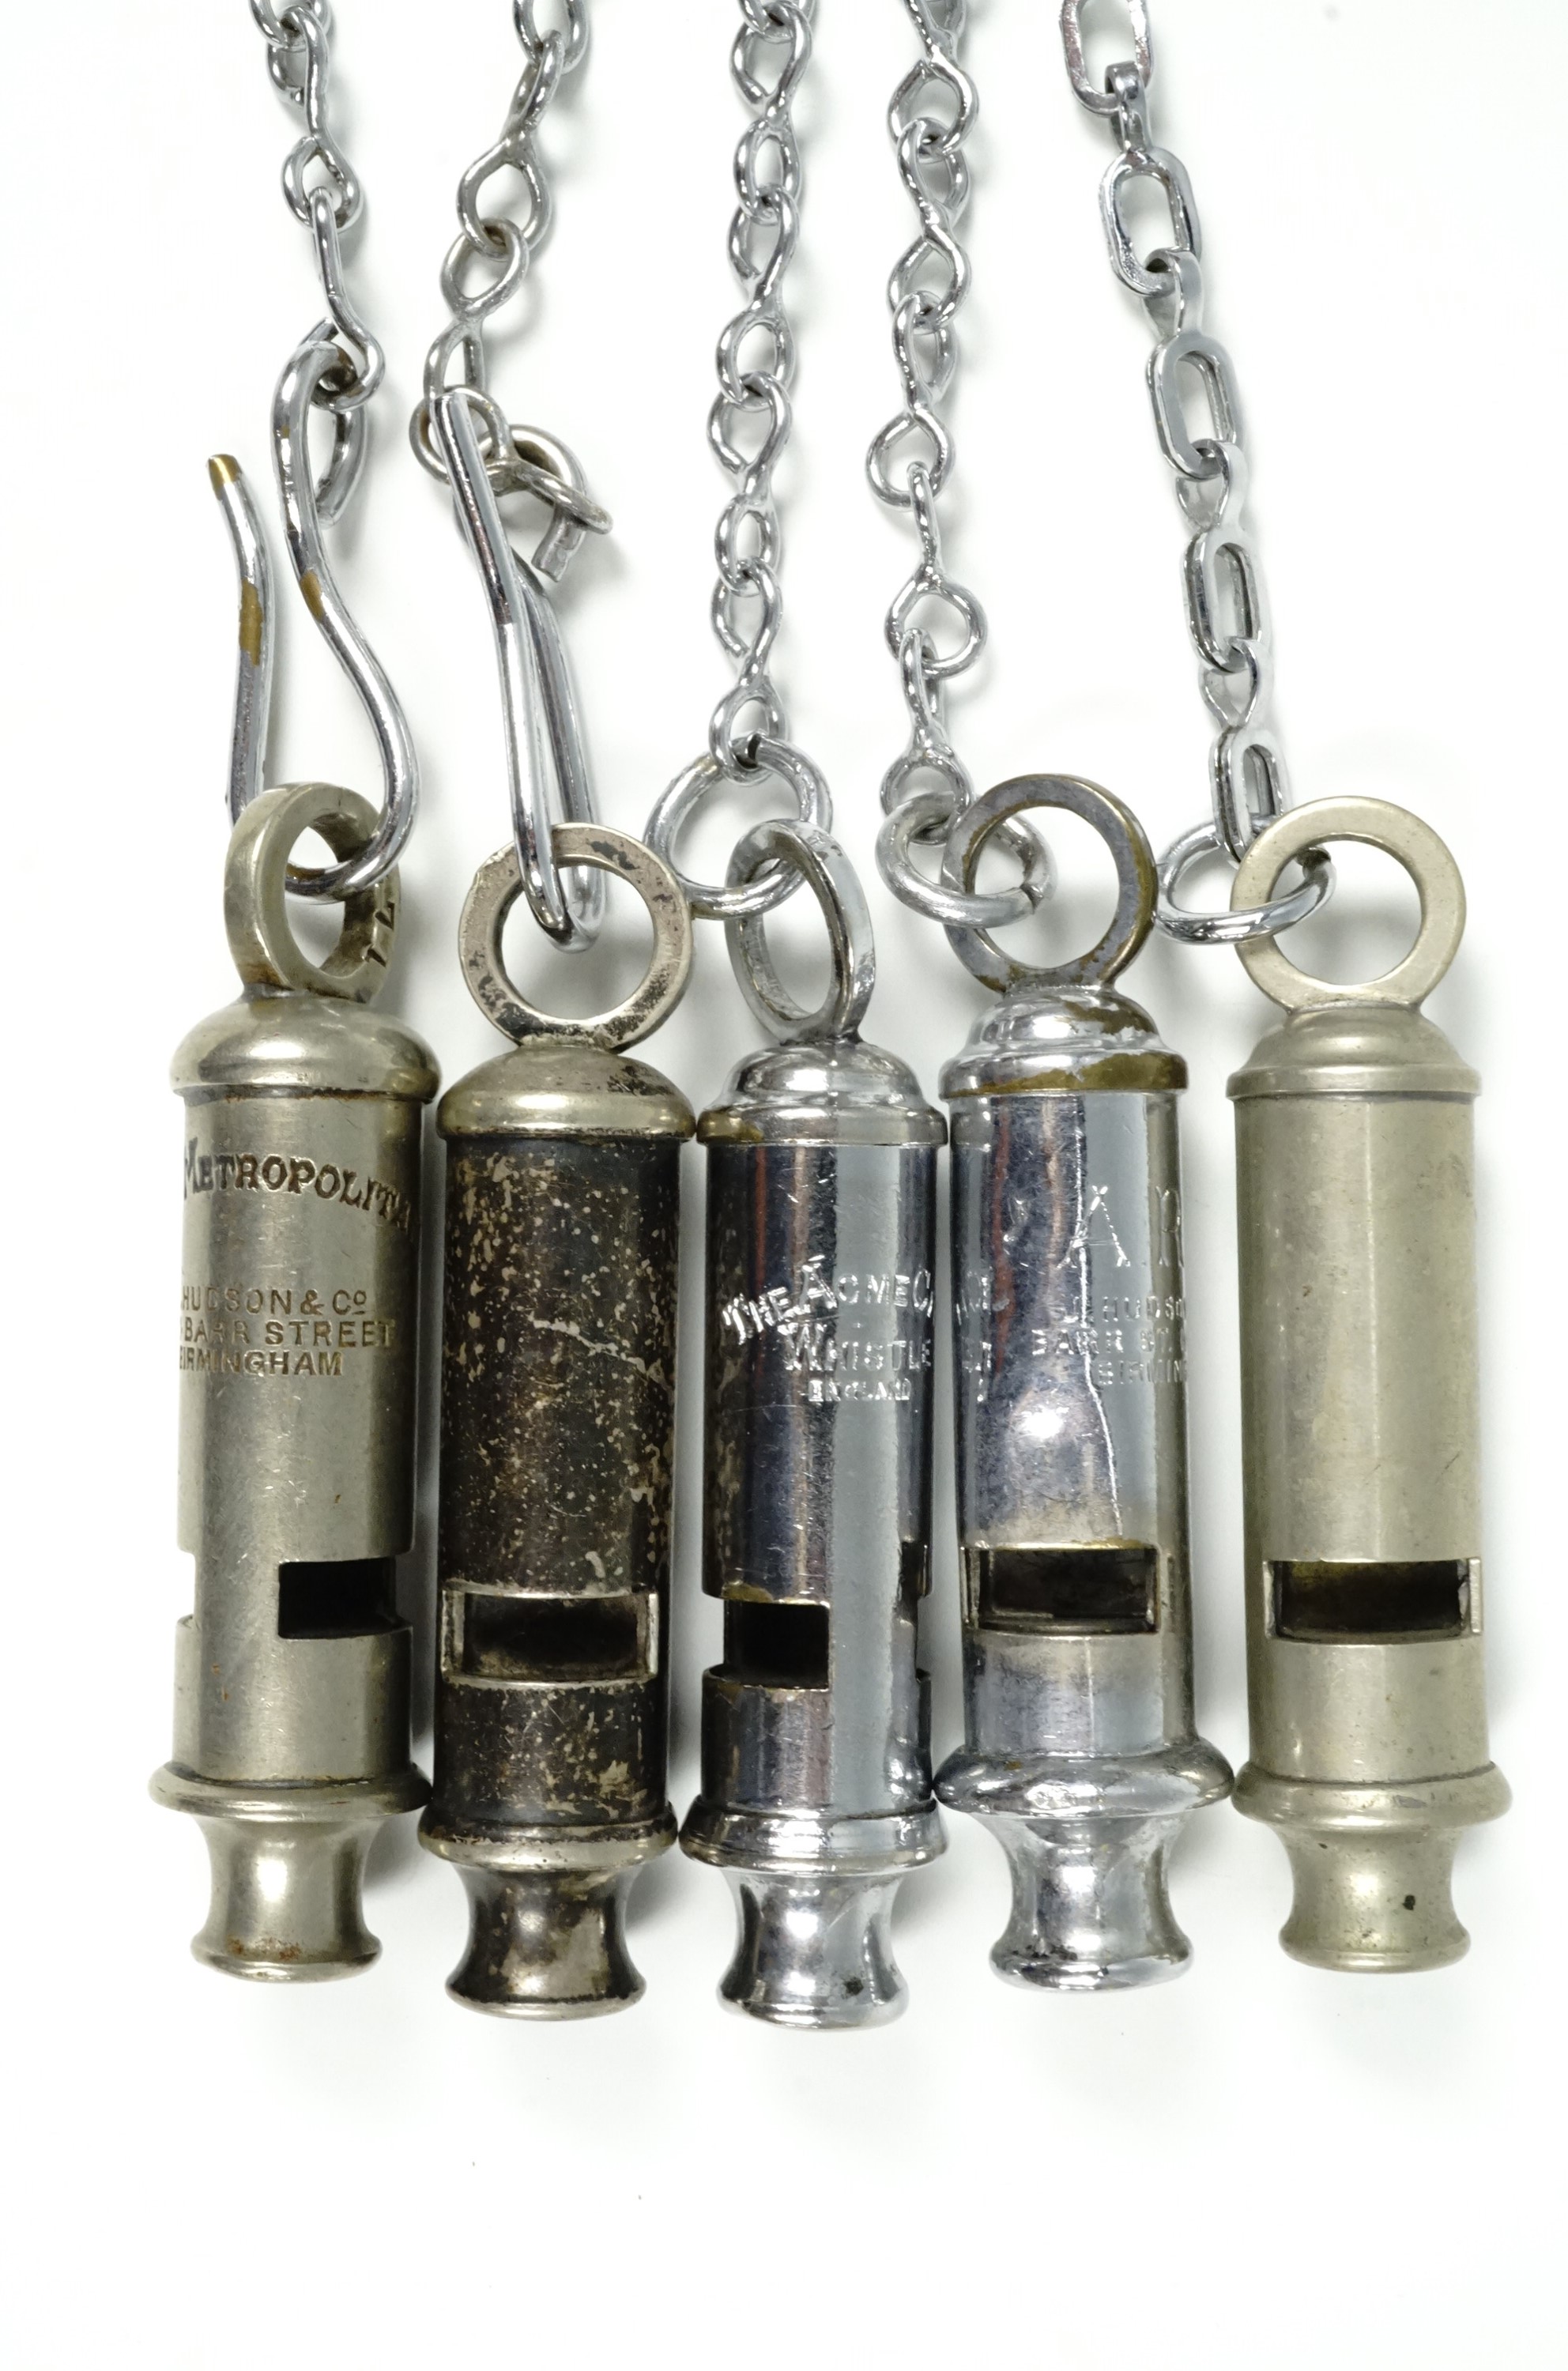 Five police whistles with chains, comprising 'ARP' whistle by Hudson and Co., 'The Metropolitan'